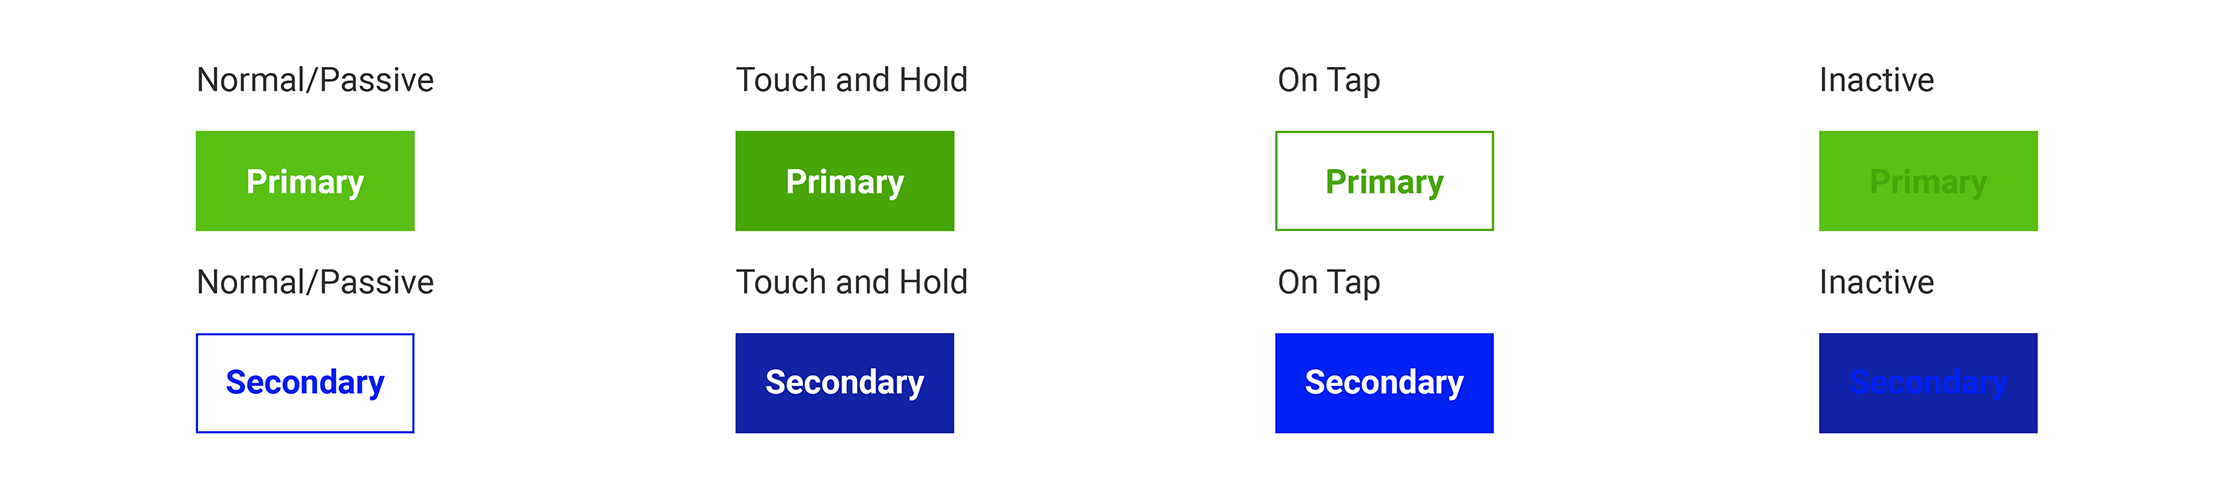 The design properties of the primary and secondary buttons on the header